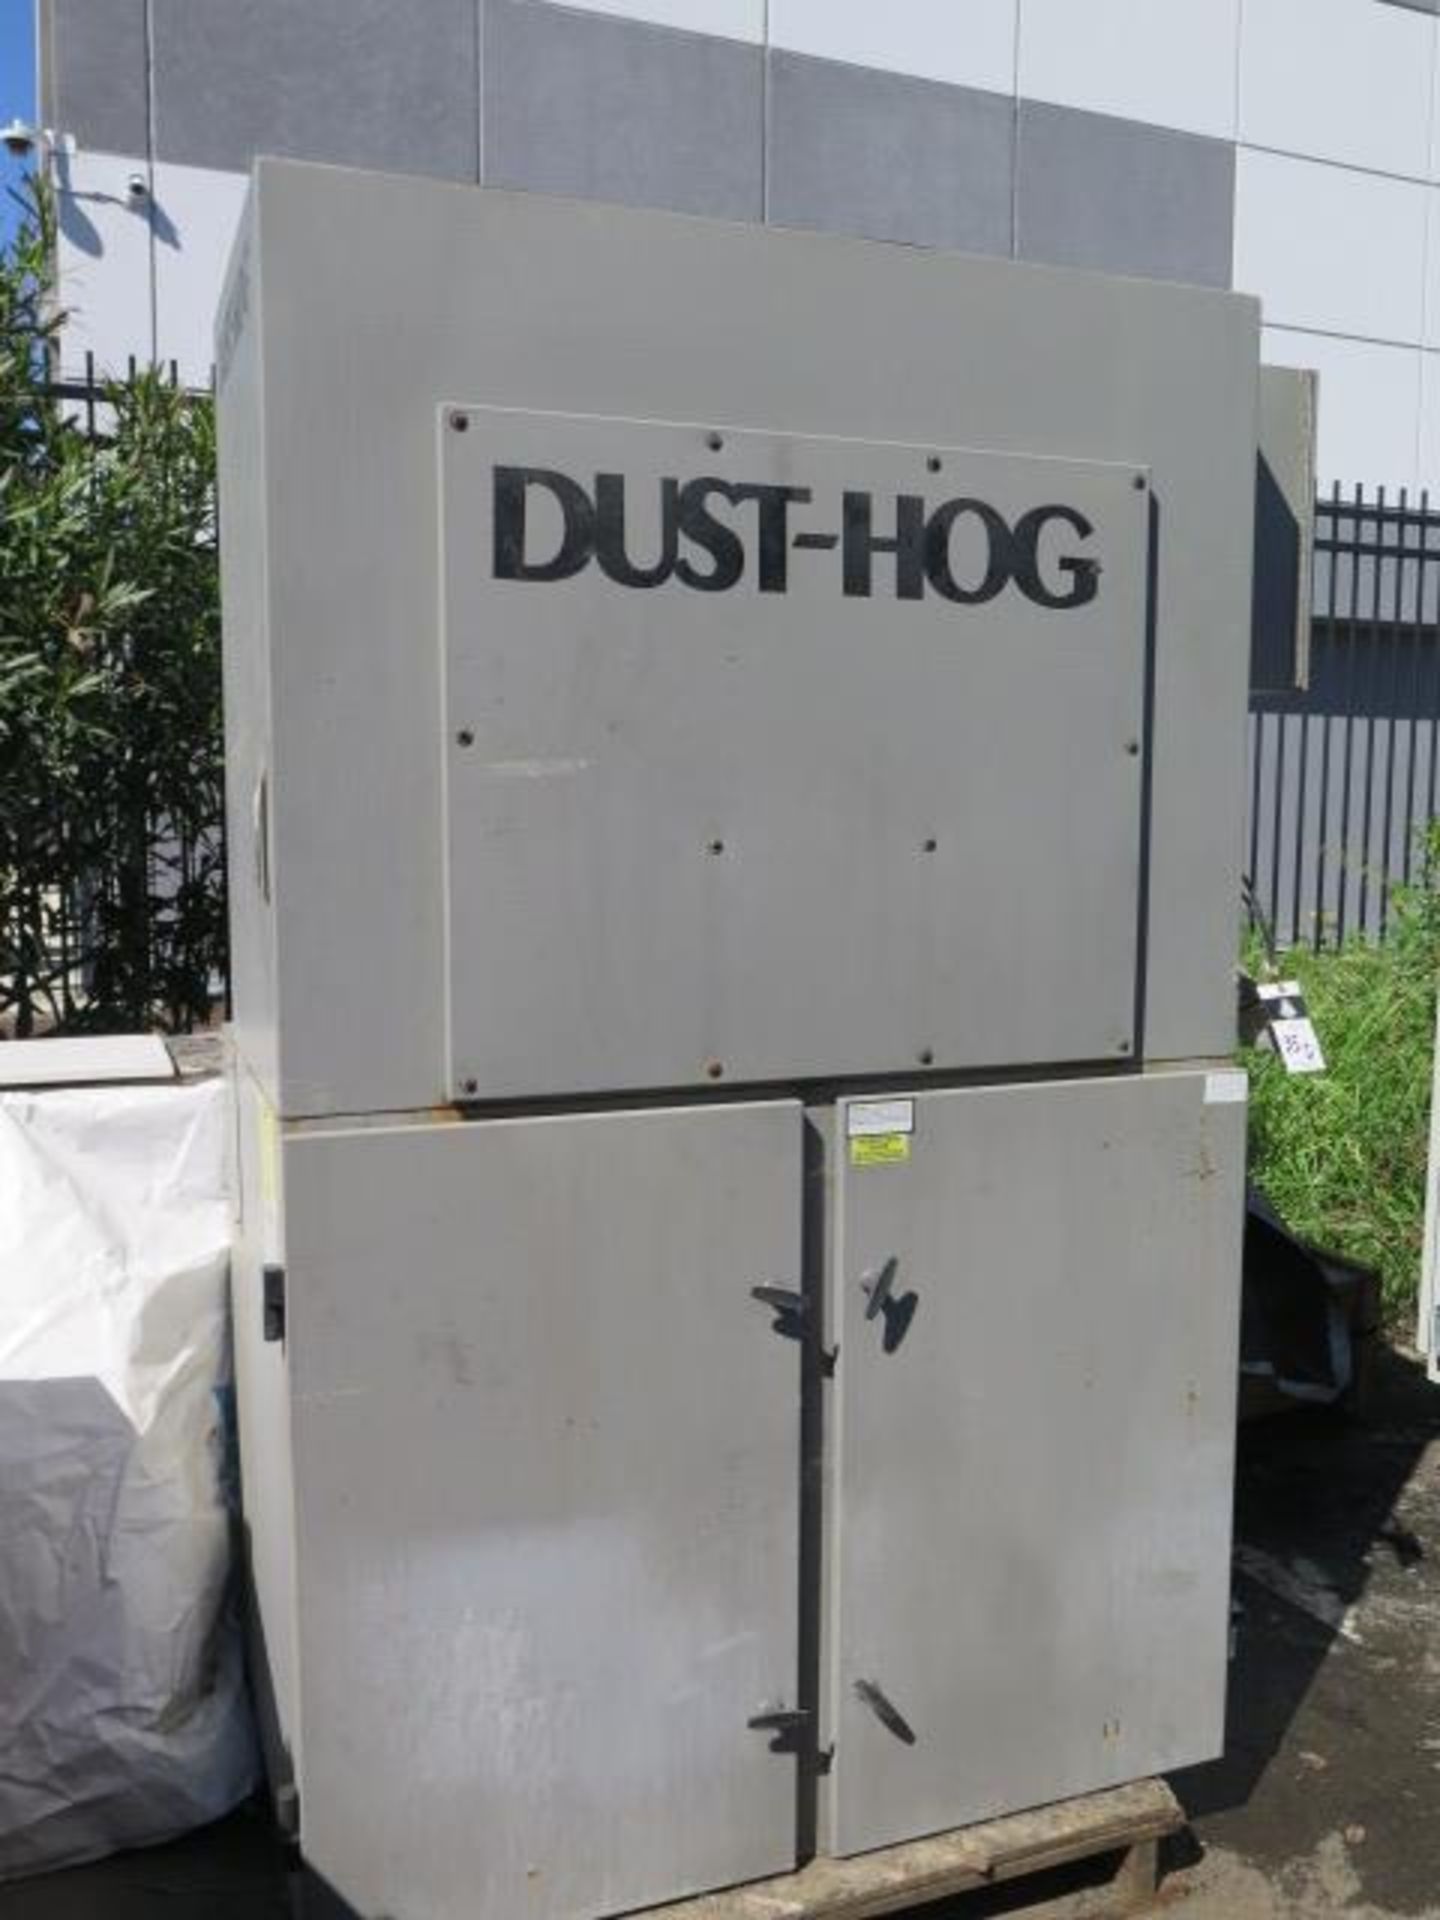 United Air Specialists, Dust-Hog mdl. SC3400 Dust Collector s/n 60047702 (SOLD AS-IS - NO WARRANTY) - Image 2 of 9